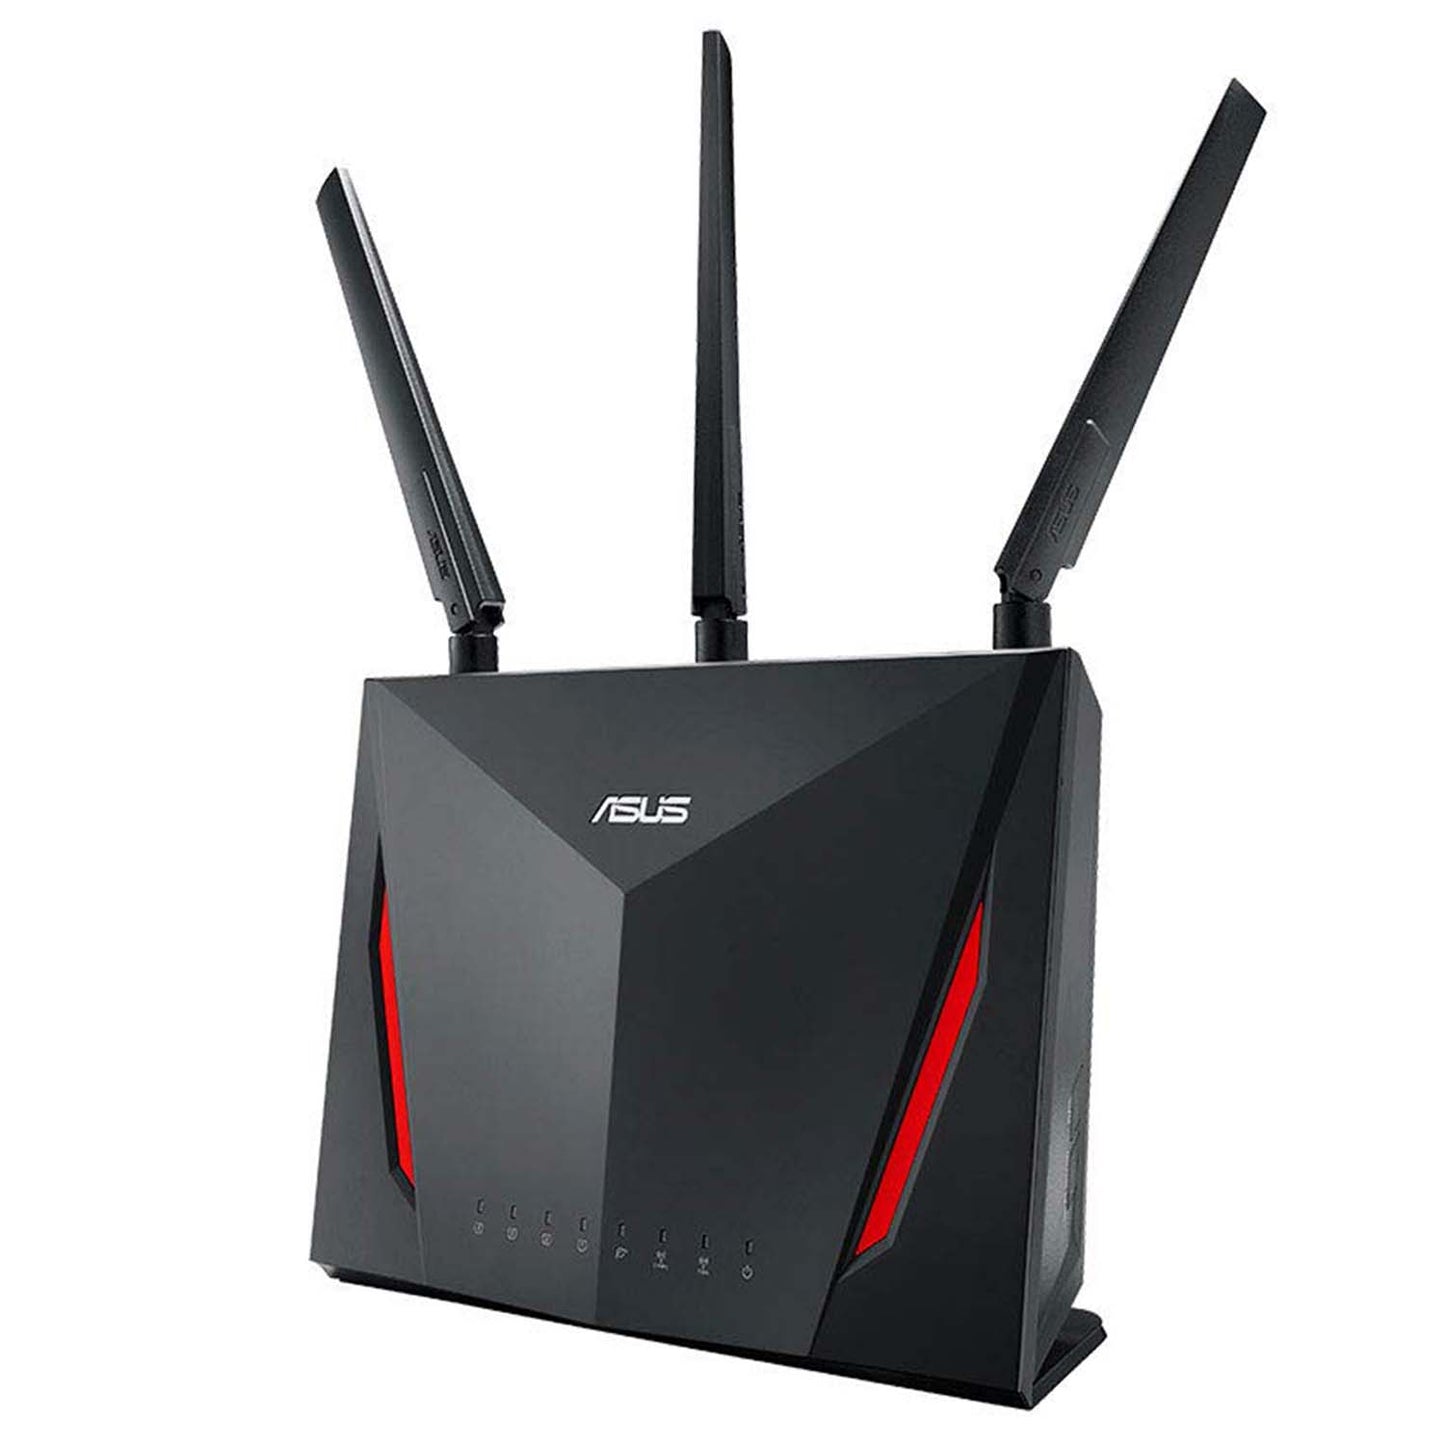 ASUS RT-AC86U AC2900 Dual Band Gigabit Gaming WiFi Router with MU-MIMO AiMesh AiProtection and WTFast game accelerator